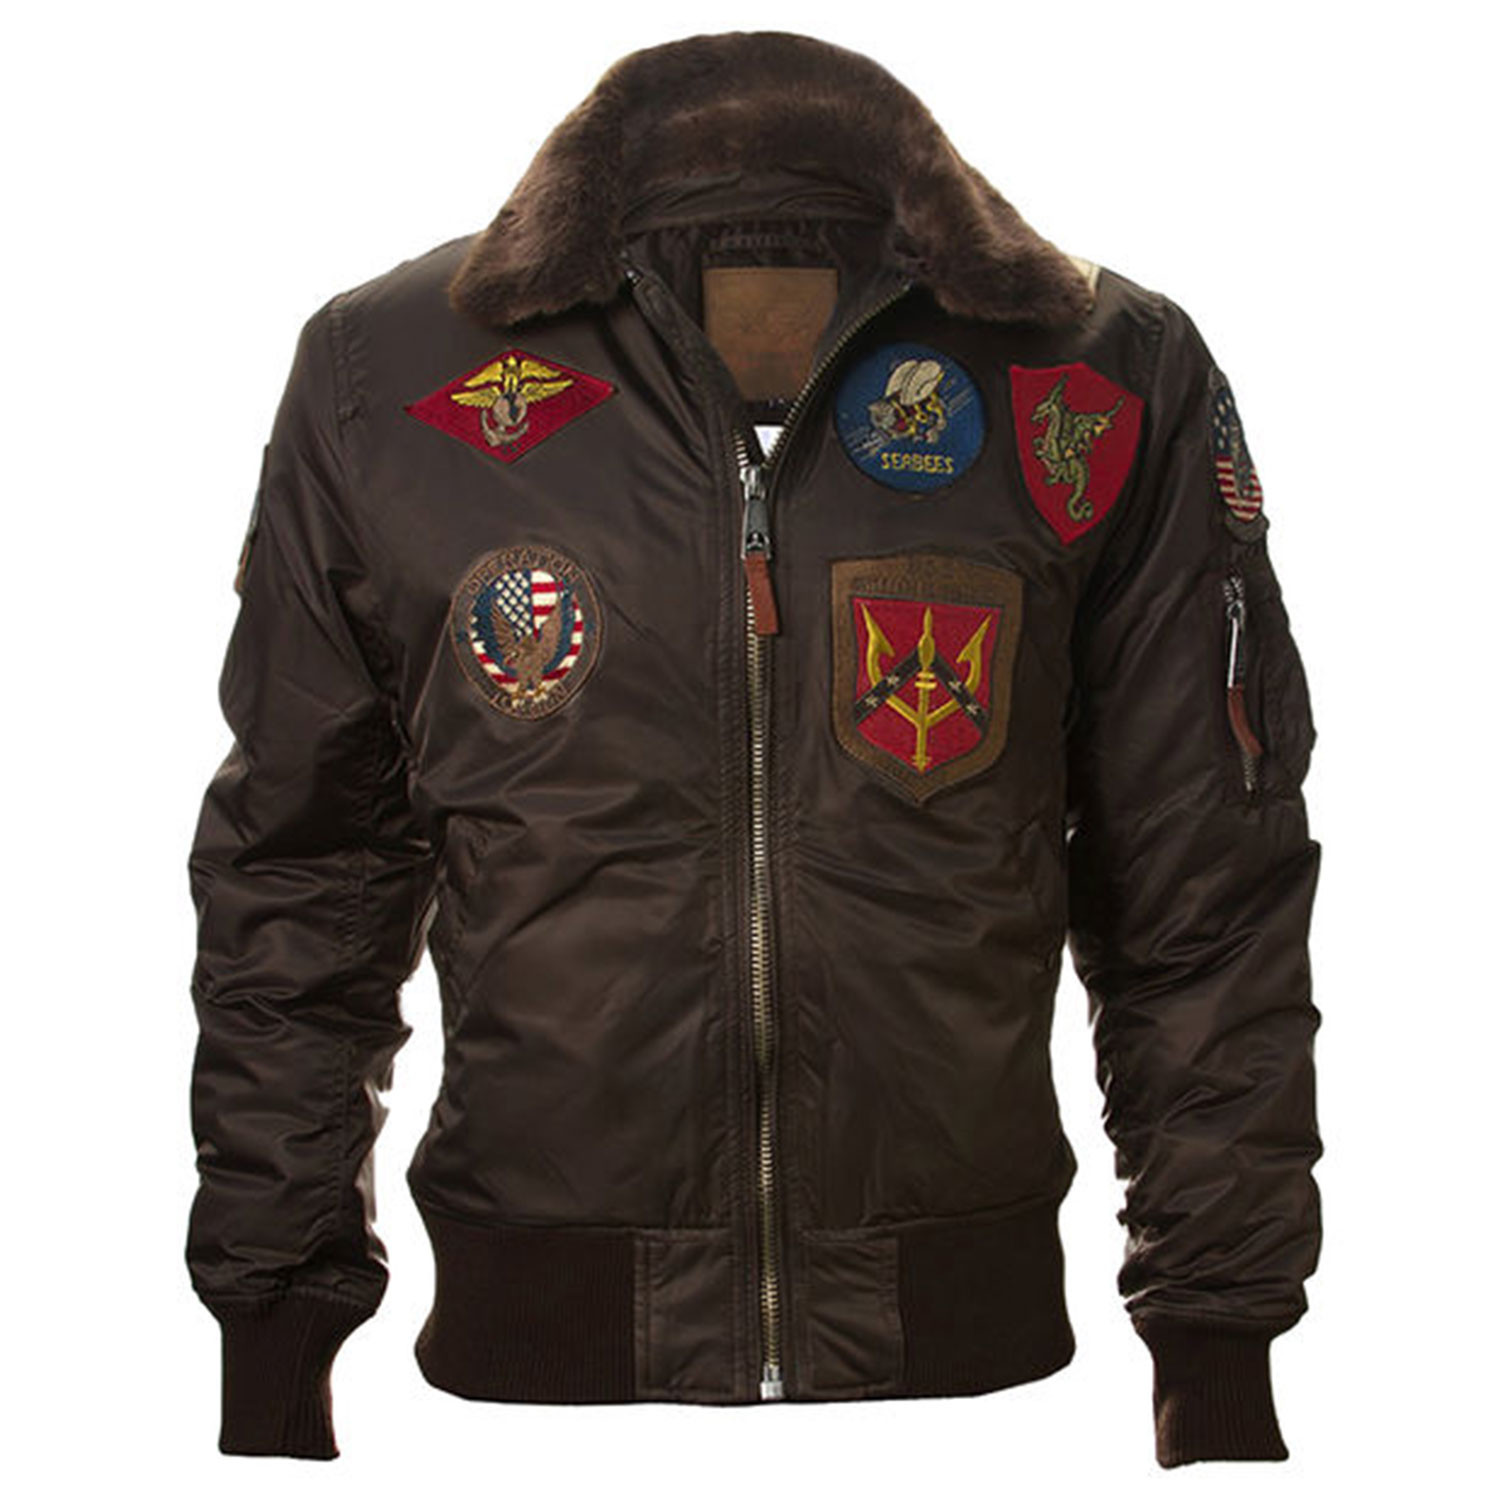 B-15 Bomber Jacket + Patches // Brown (S) - Top Gun - Touch of Modern